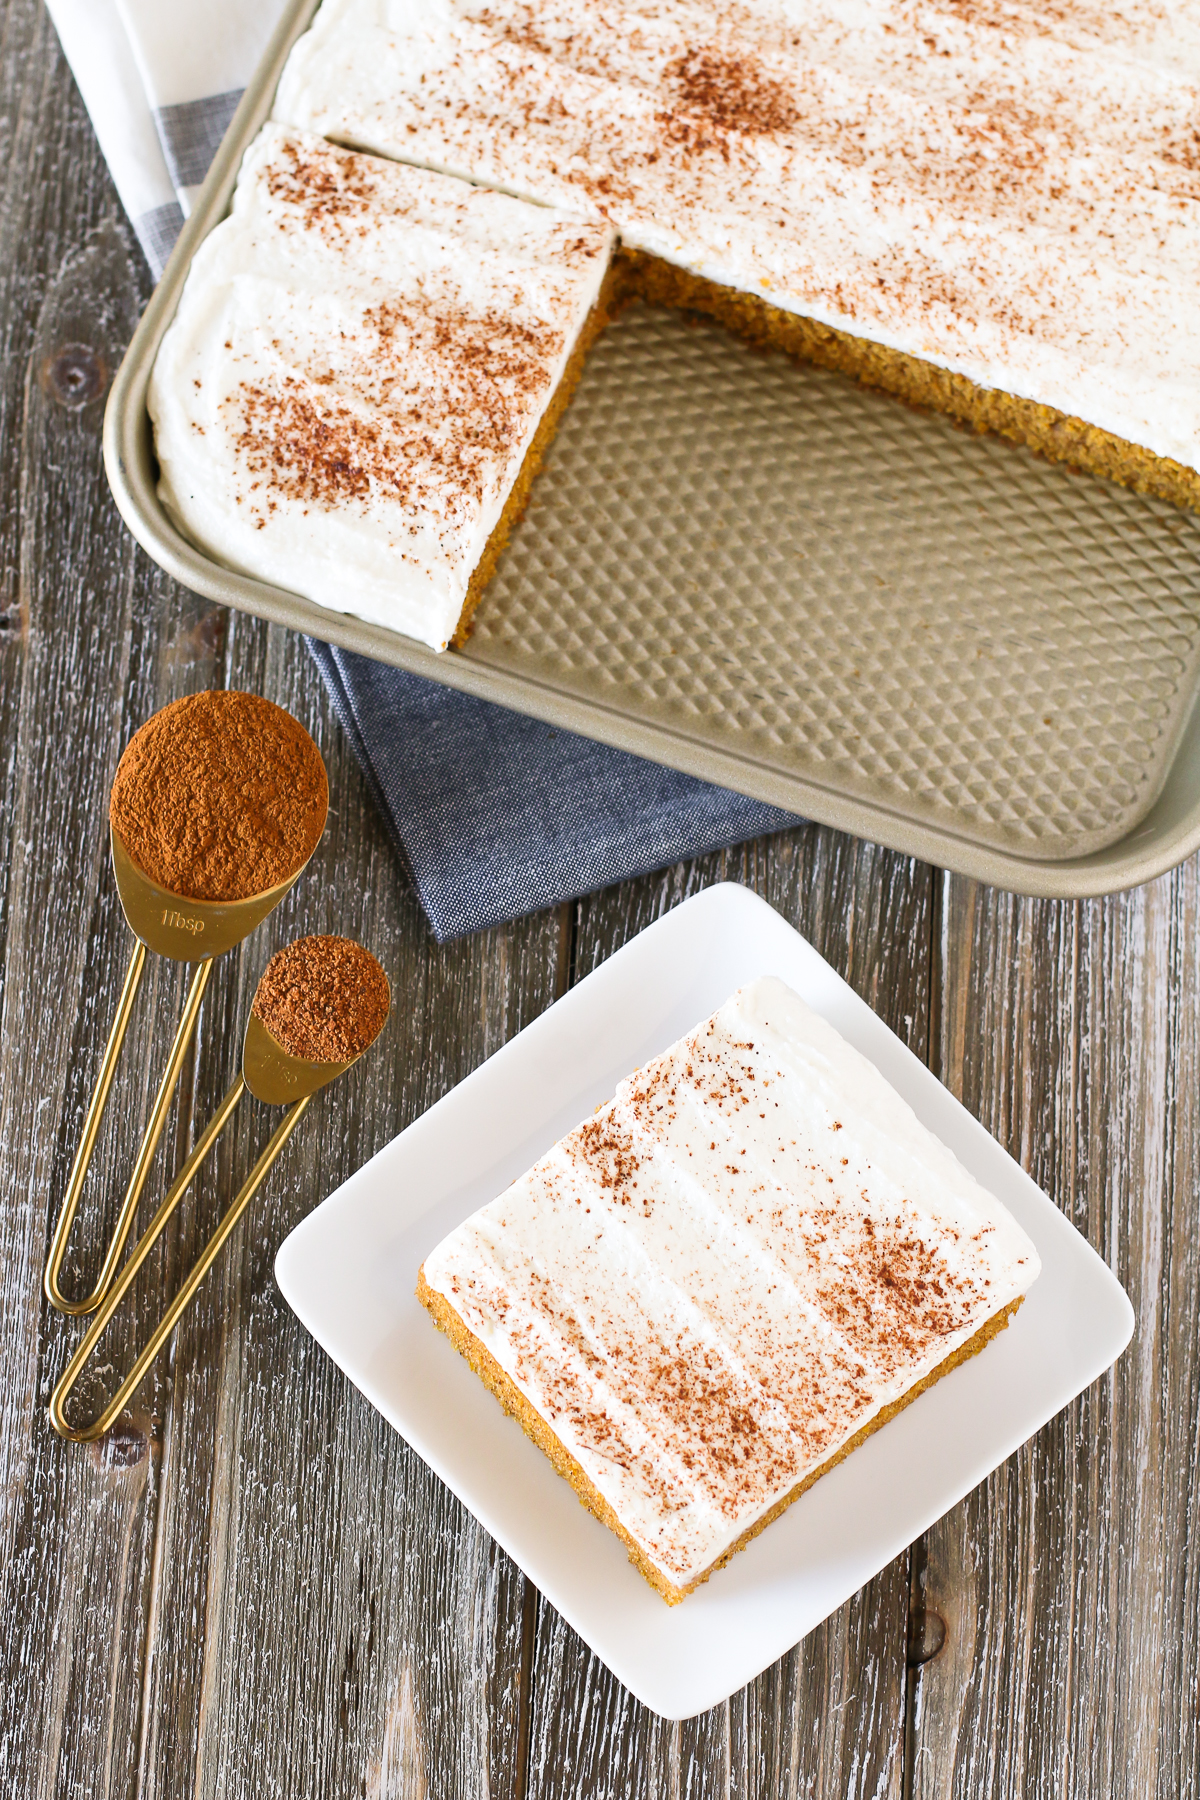 Gluten Free Vegan Pumpkin Bars. Moist pumpkin cake with all the fall spices, topped with the creamiest dairy free cream cheese frosting. this fall dessert is HEAVEN!